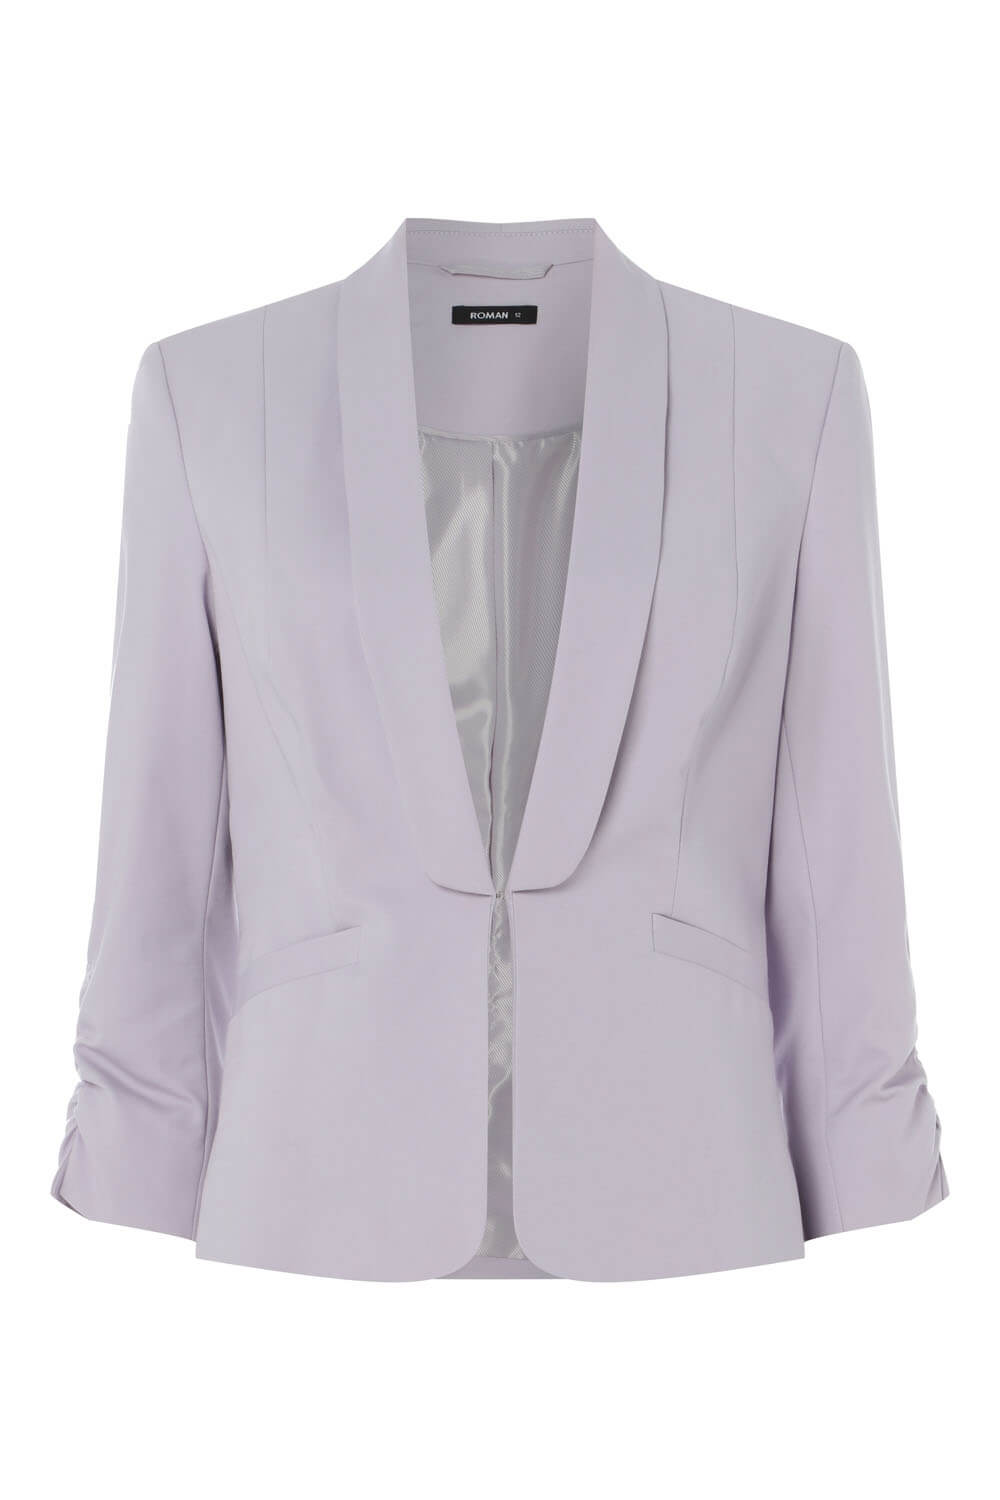 Lilac Ruched 3/4 Sleeve Jacket, Image 5 of 5